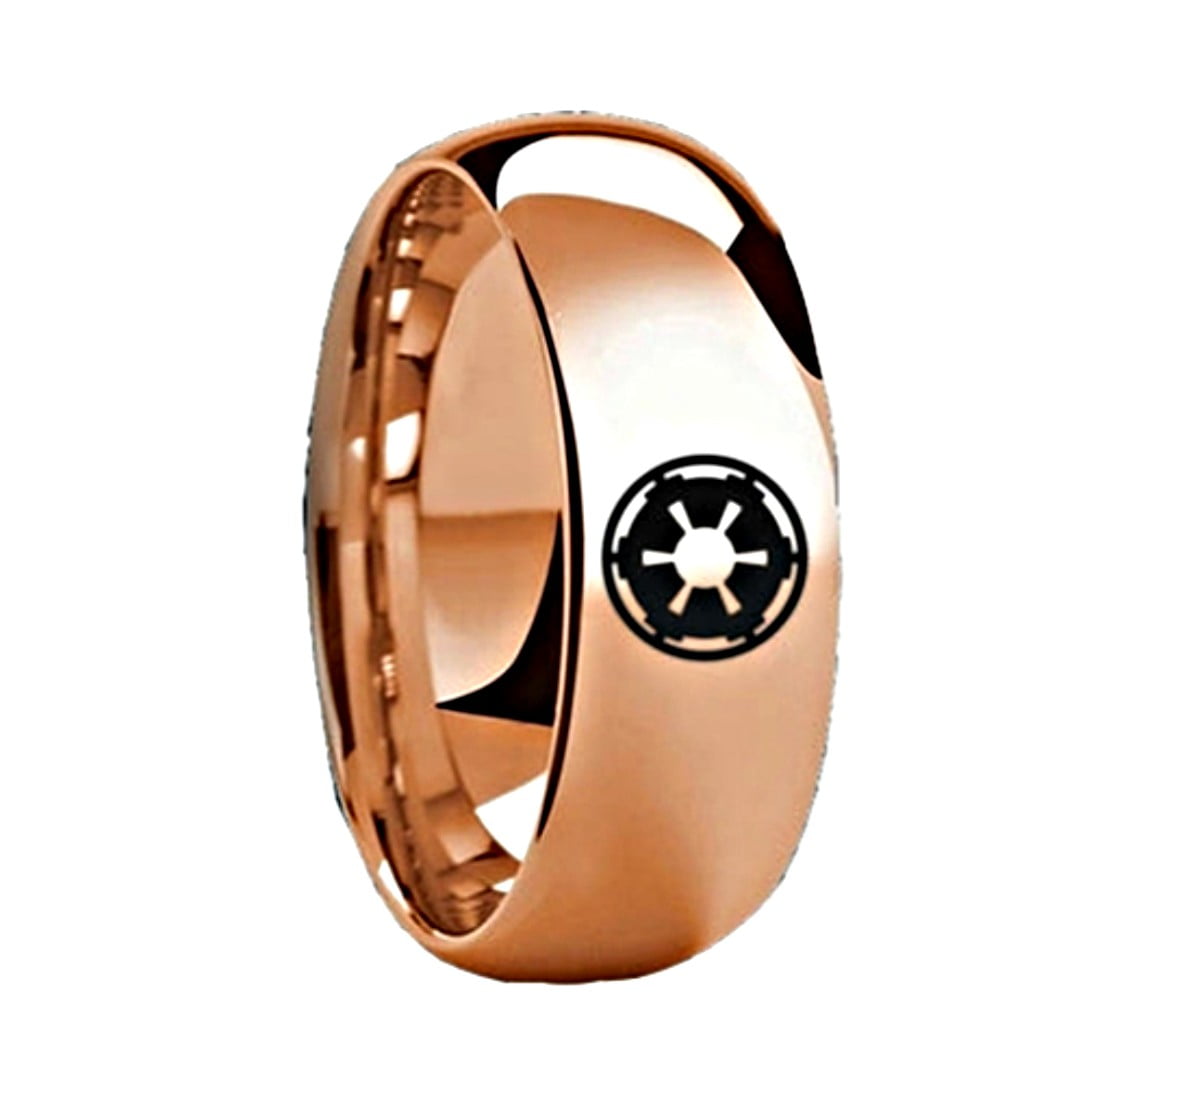 Thorsten Star Wars Sith Imperial Symbol Design Ring Polished Rose Gold Plated Tungsten Domed Style Wedding Band 8mm Wide from Roy Rose Jewelry